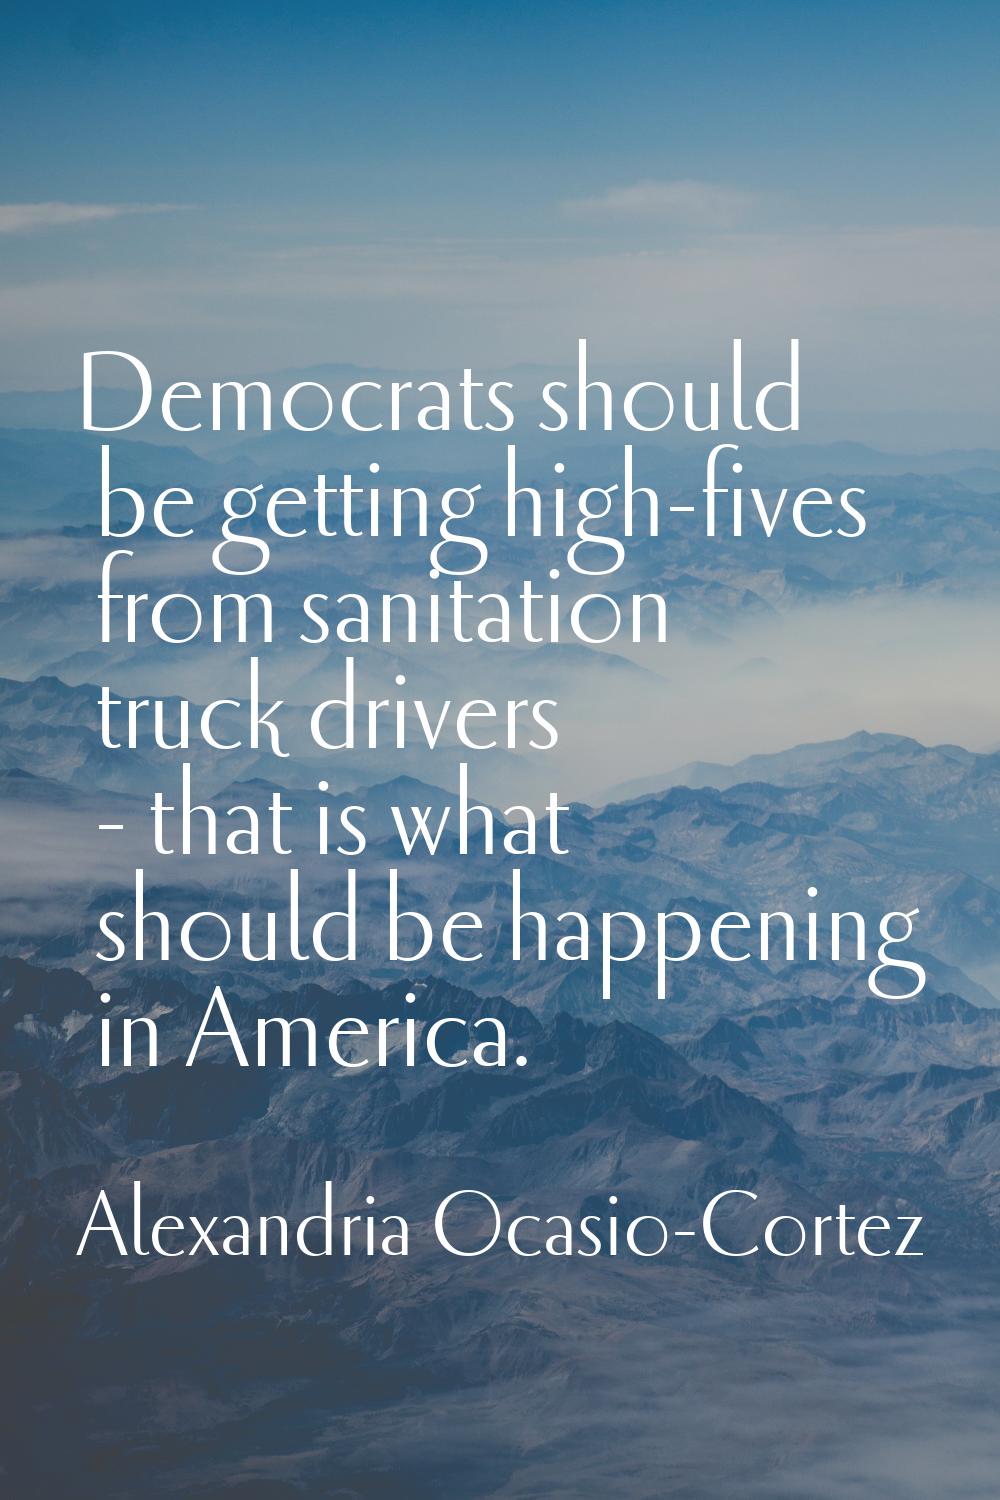 Democrats should be getting high-fives from sanitation truck drivers - that is what should be happe